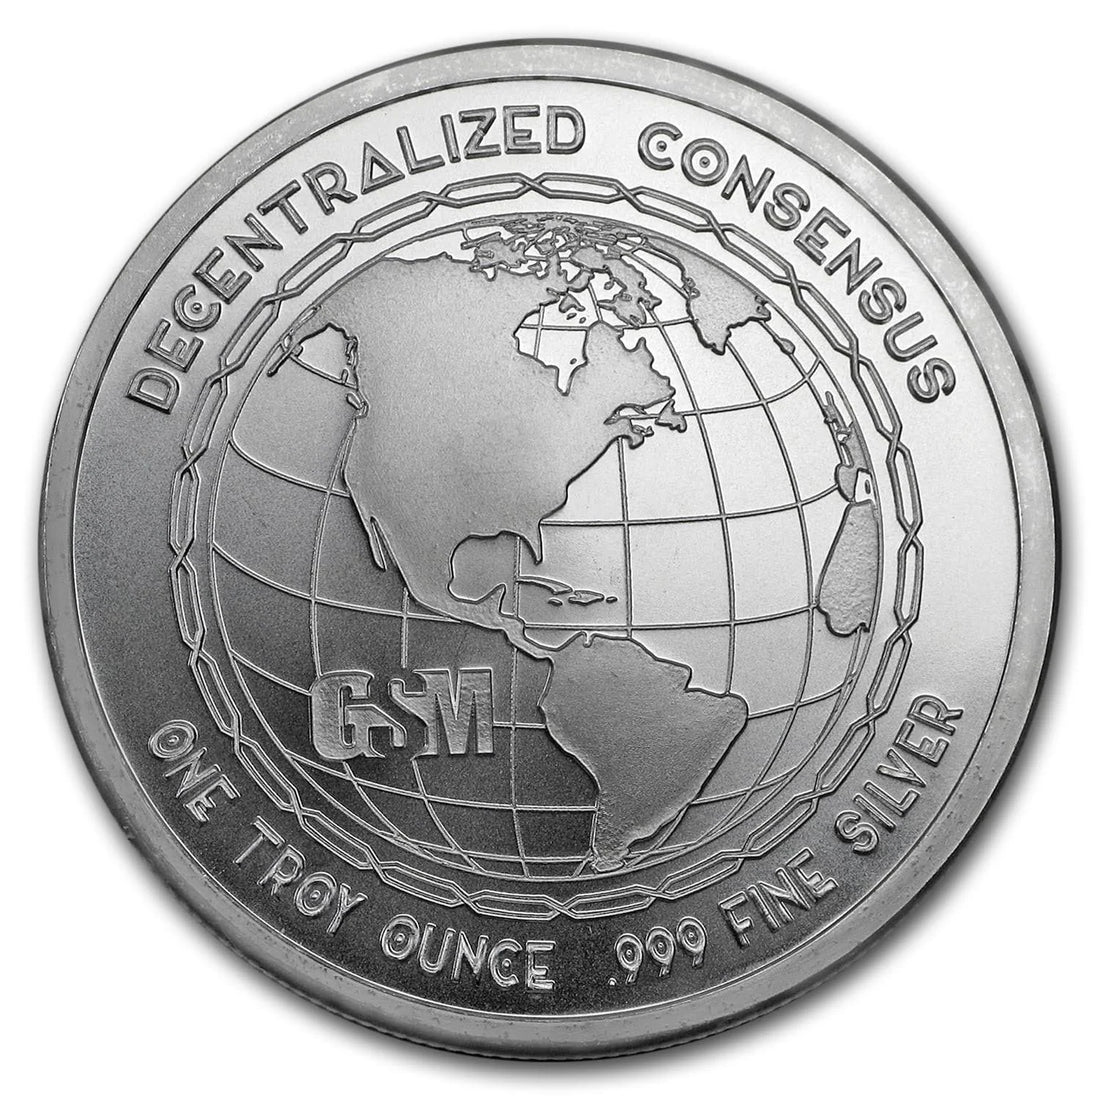 1 oz BITCOIN Silver Coin Vires In Numbers - OZB